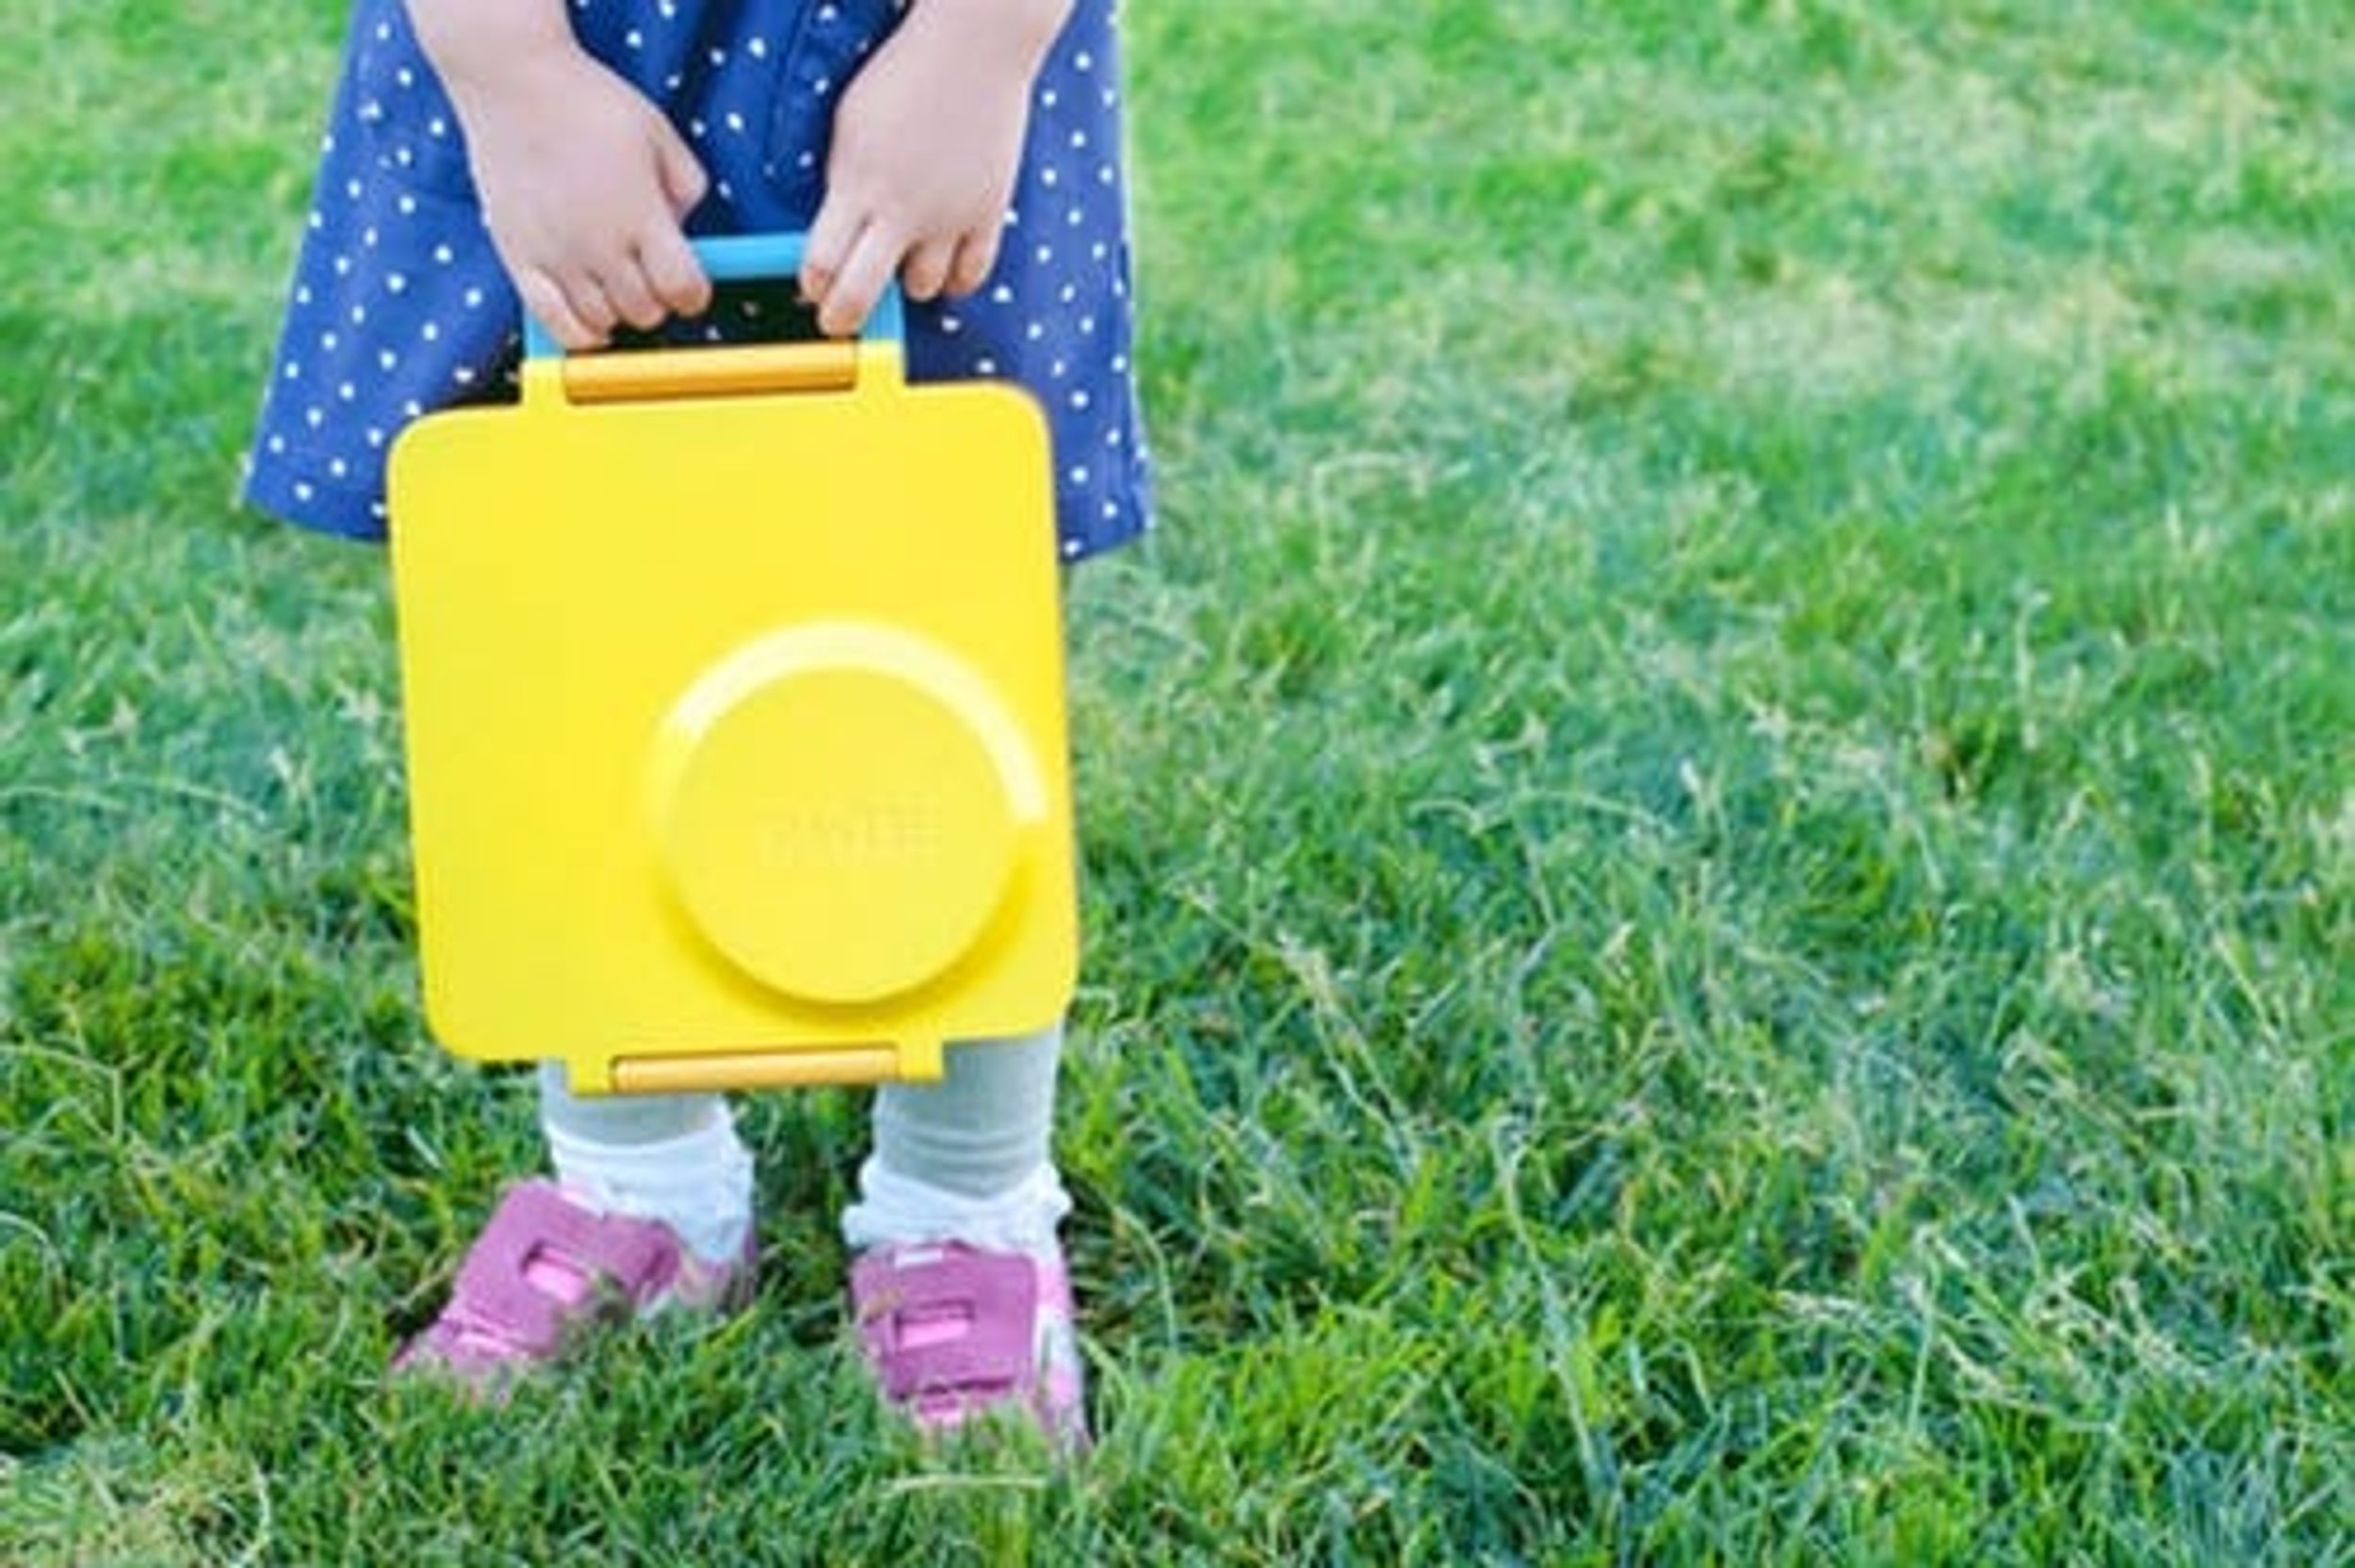 OmieBox Is the ONLY Lunchbox Your Kids Need